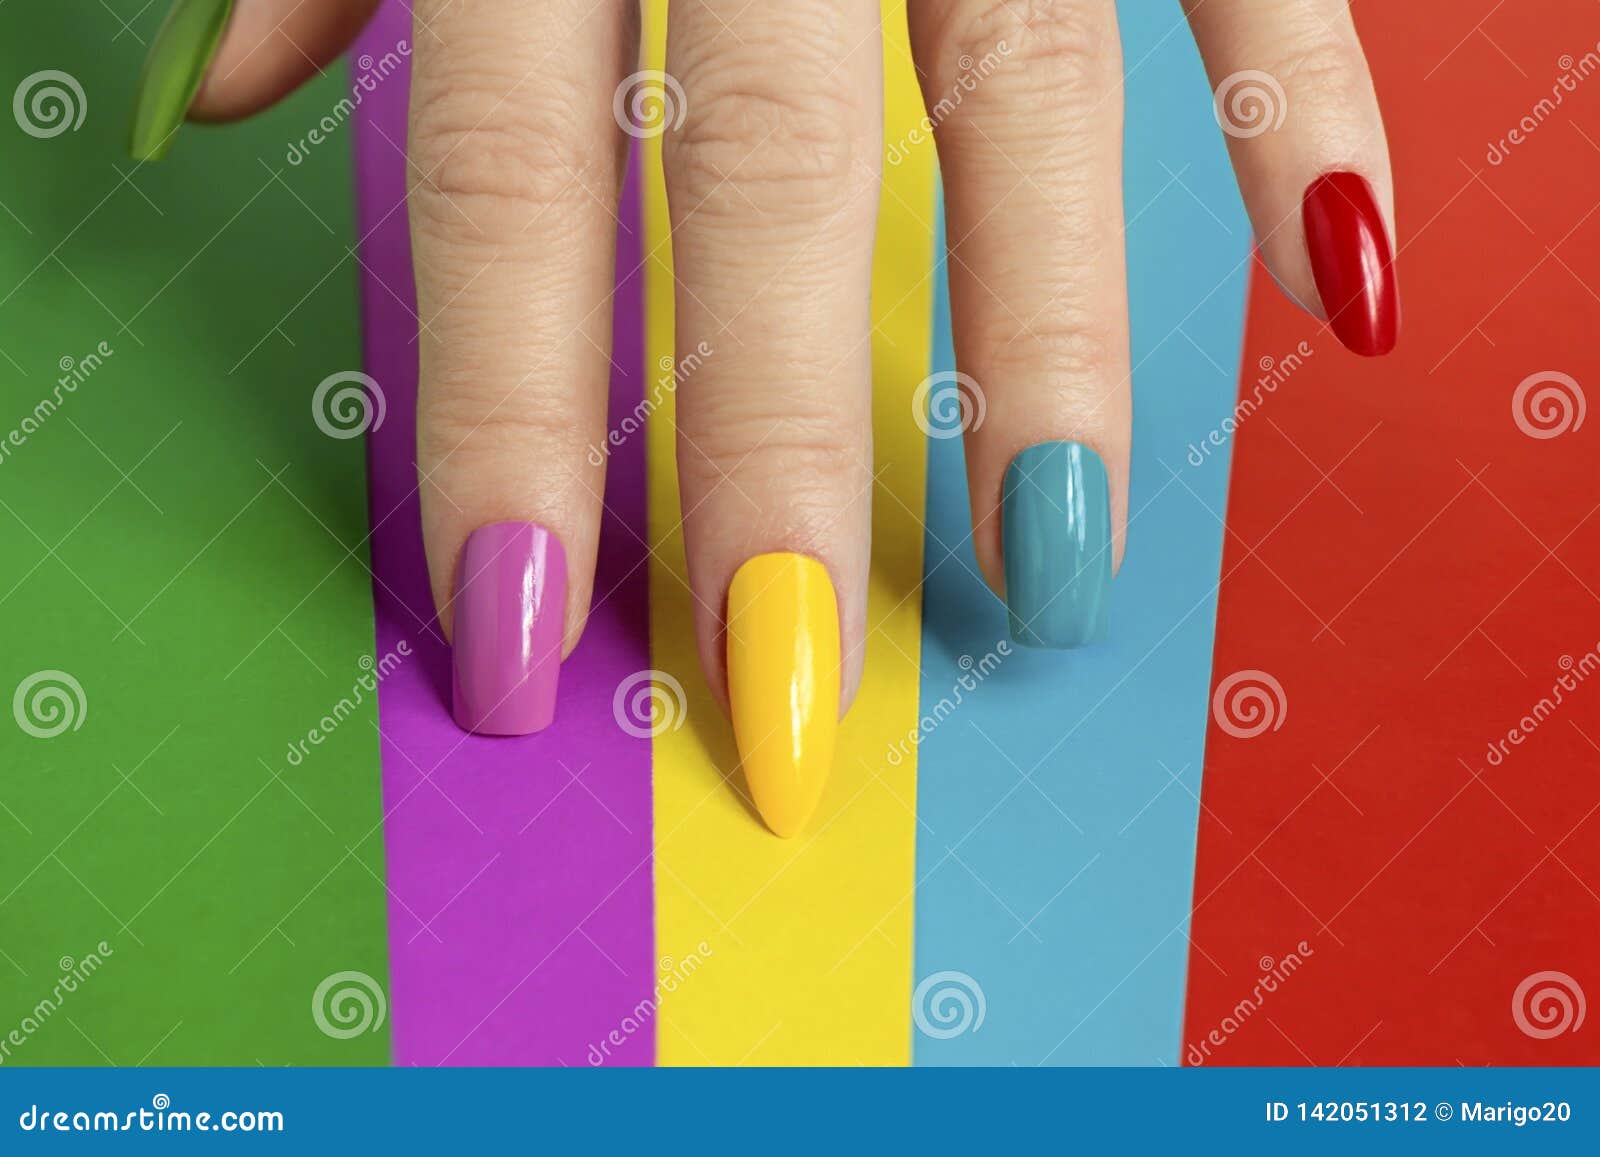 What nail shape is mostly a rectangular figure with rounded corners? - Quora